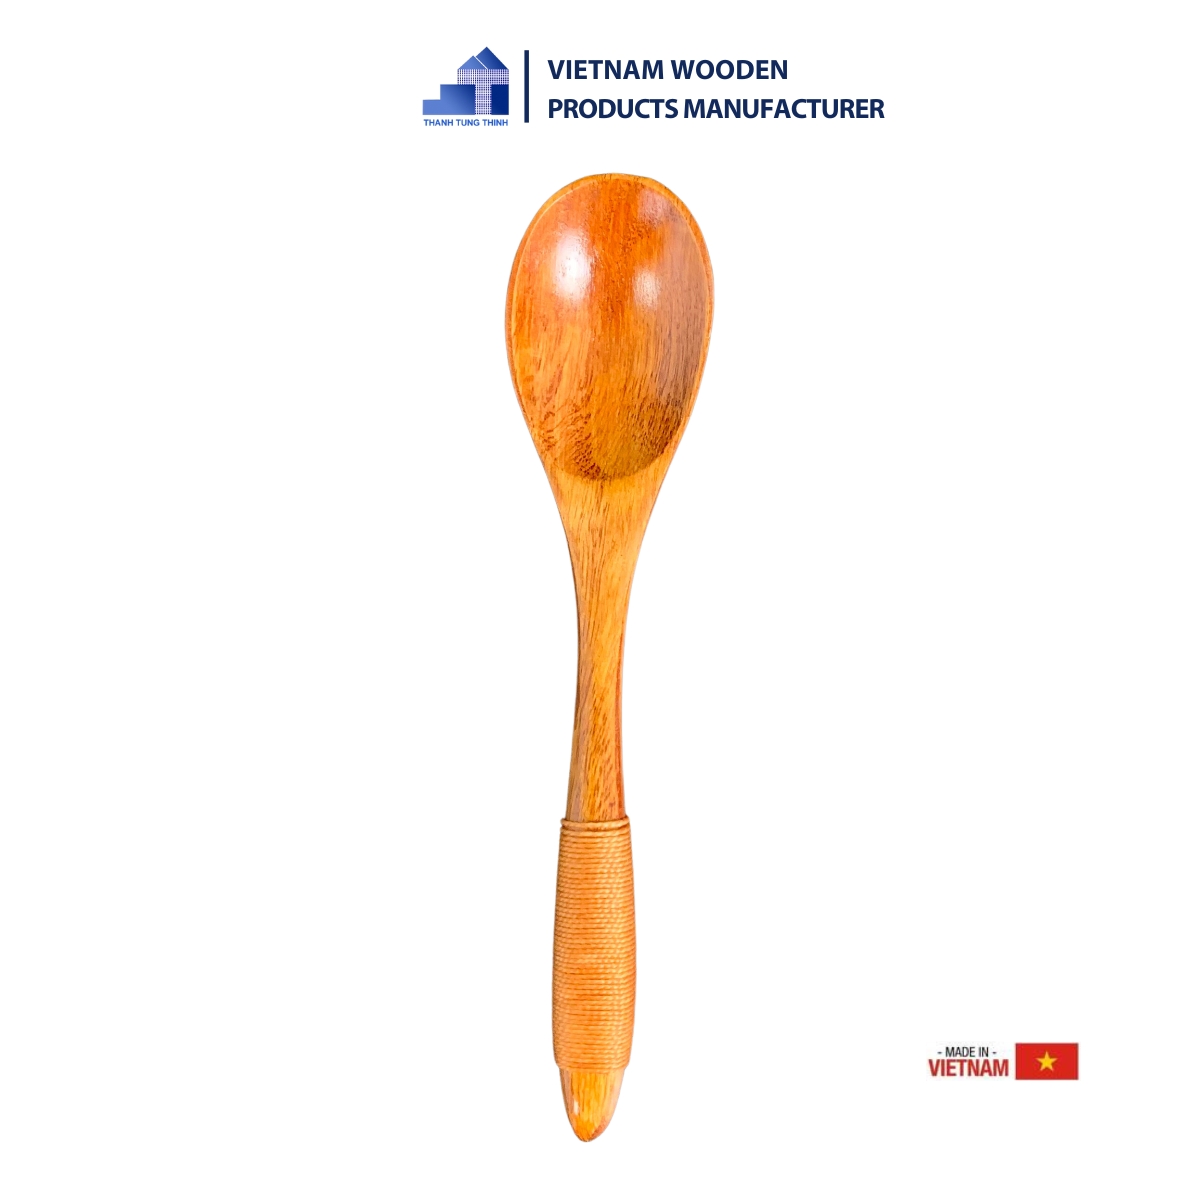 The high-end wooden spoon features a small, premium quality rope handle.